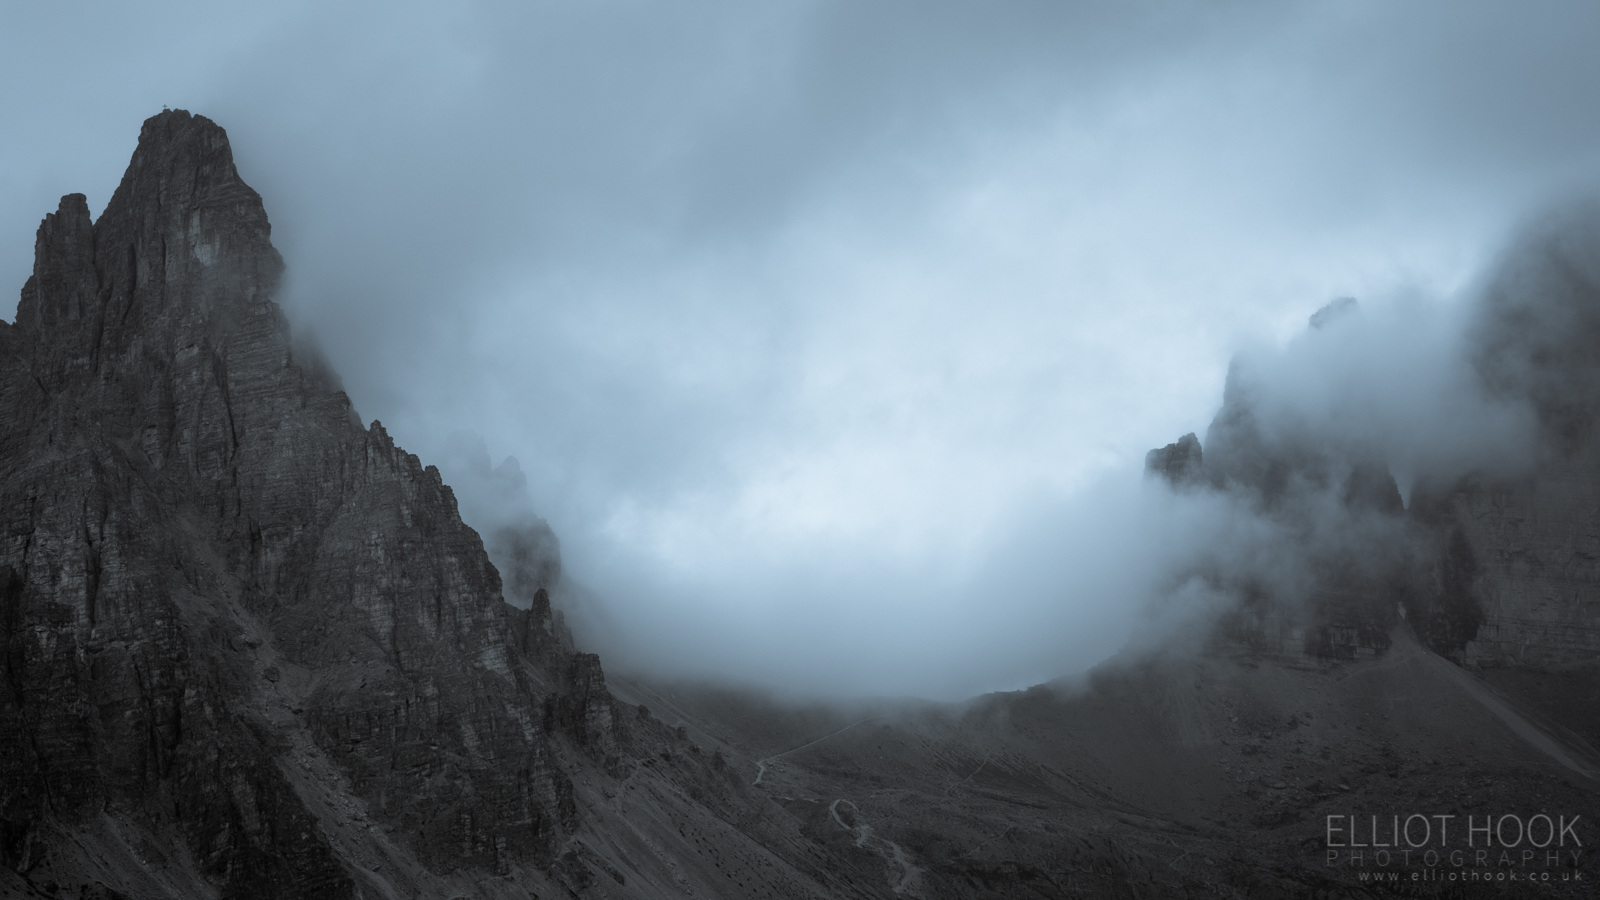 The peaks of Tre Cime shrouded in cloud